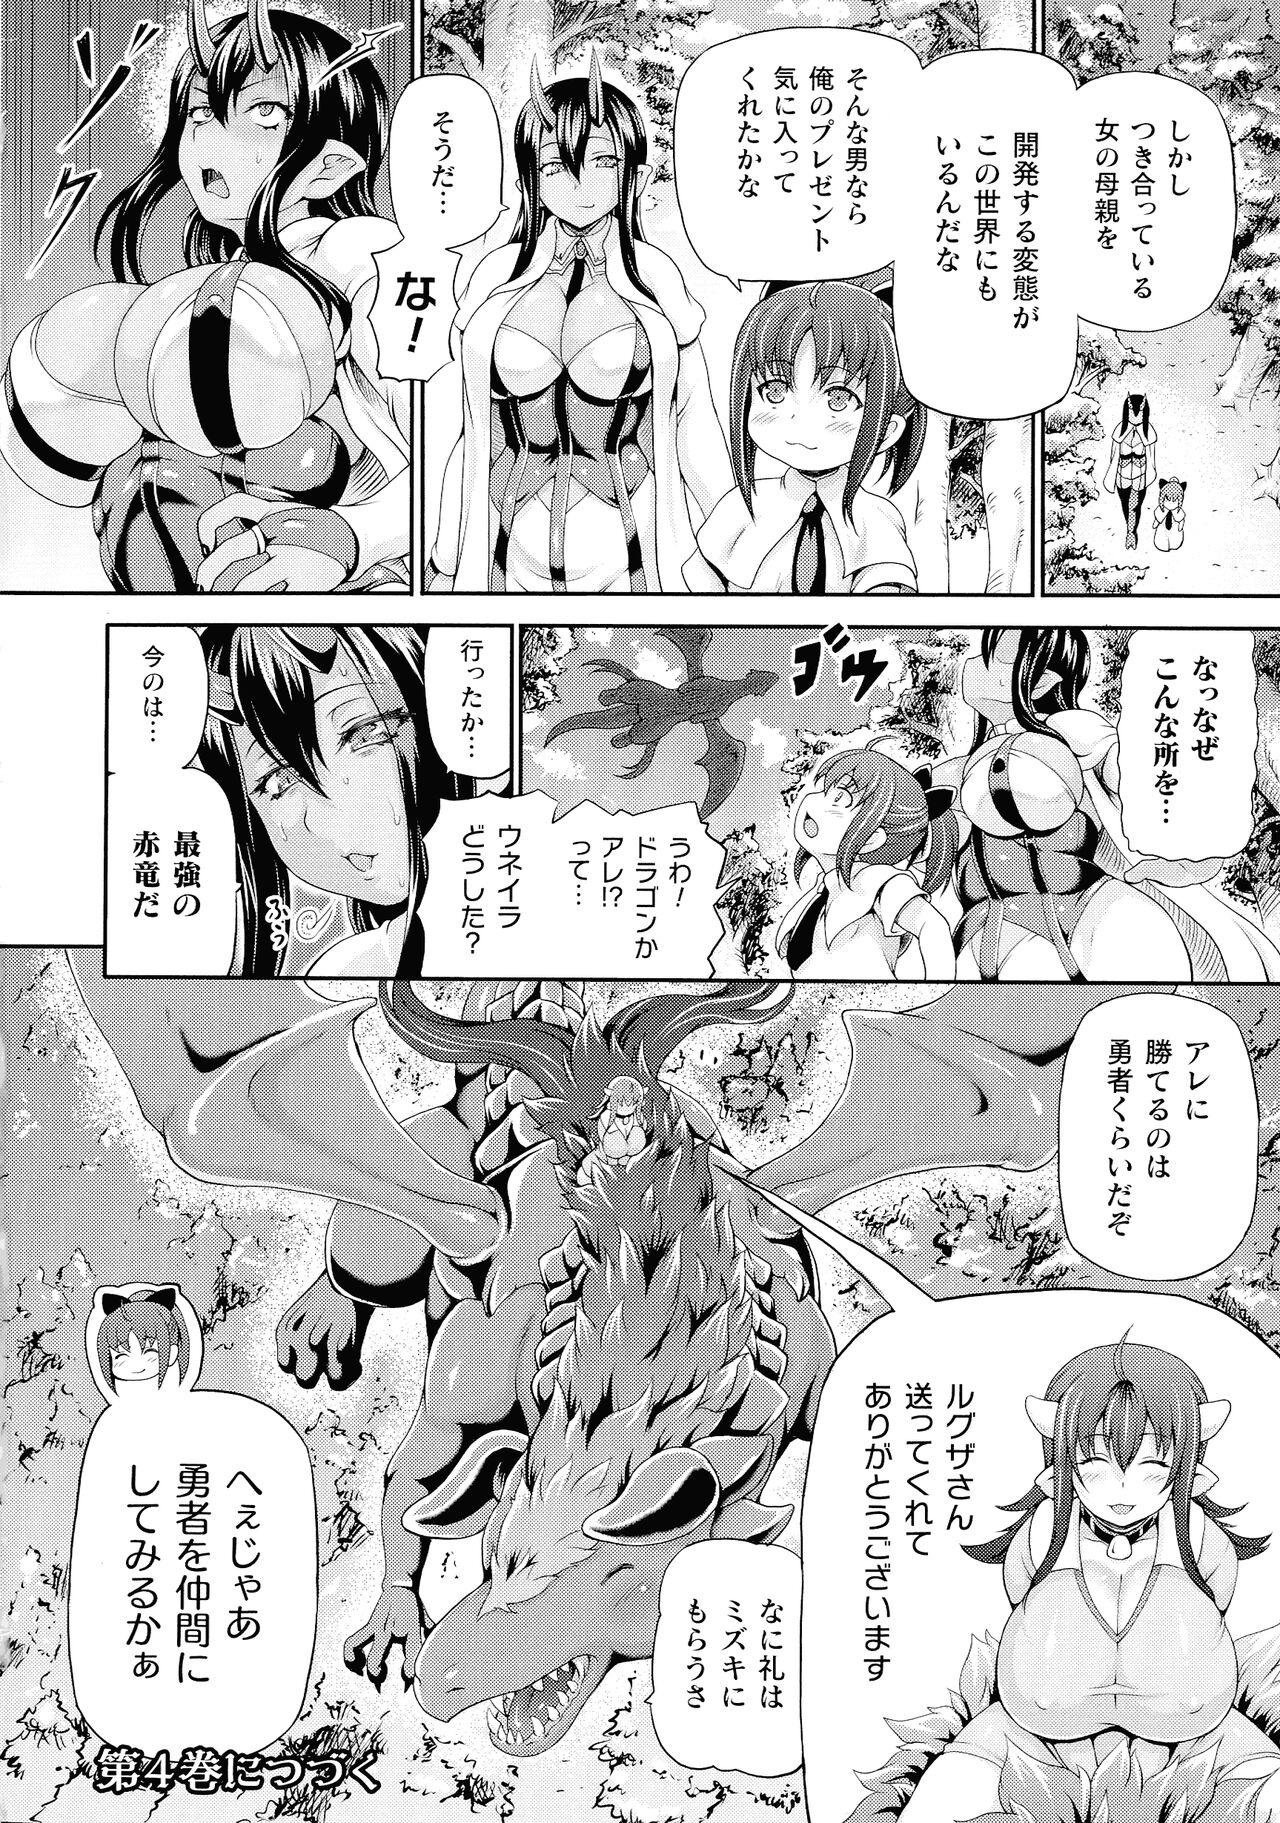 Isekai Shoukan 3 - Brothel in Another World 177